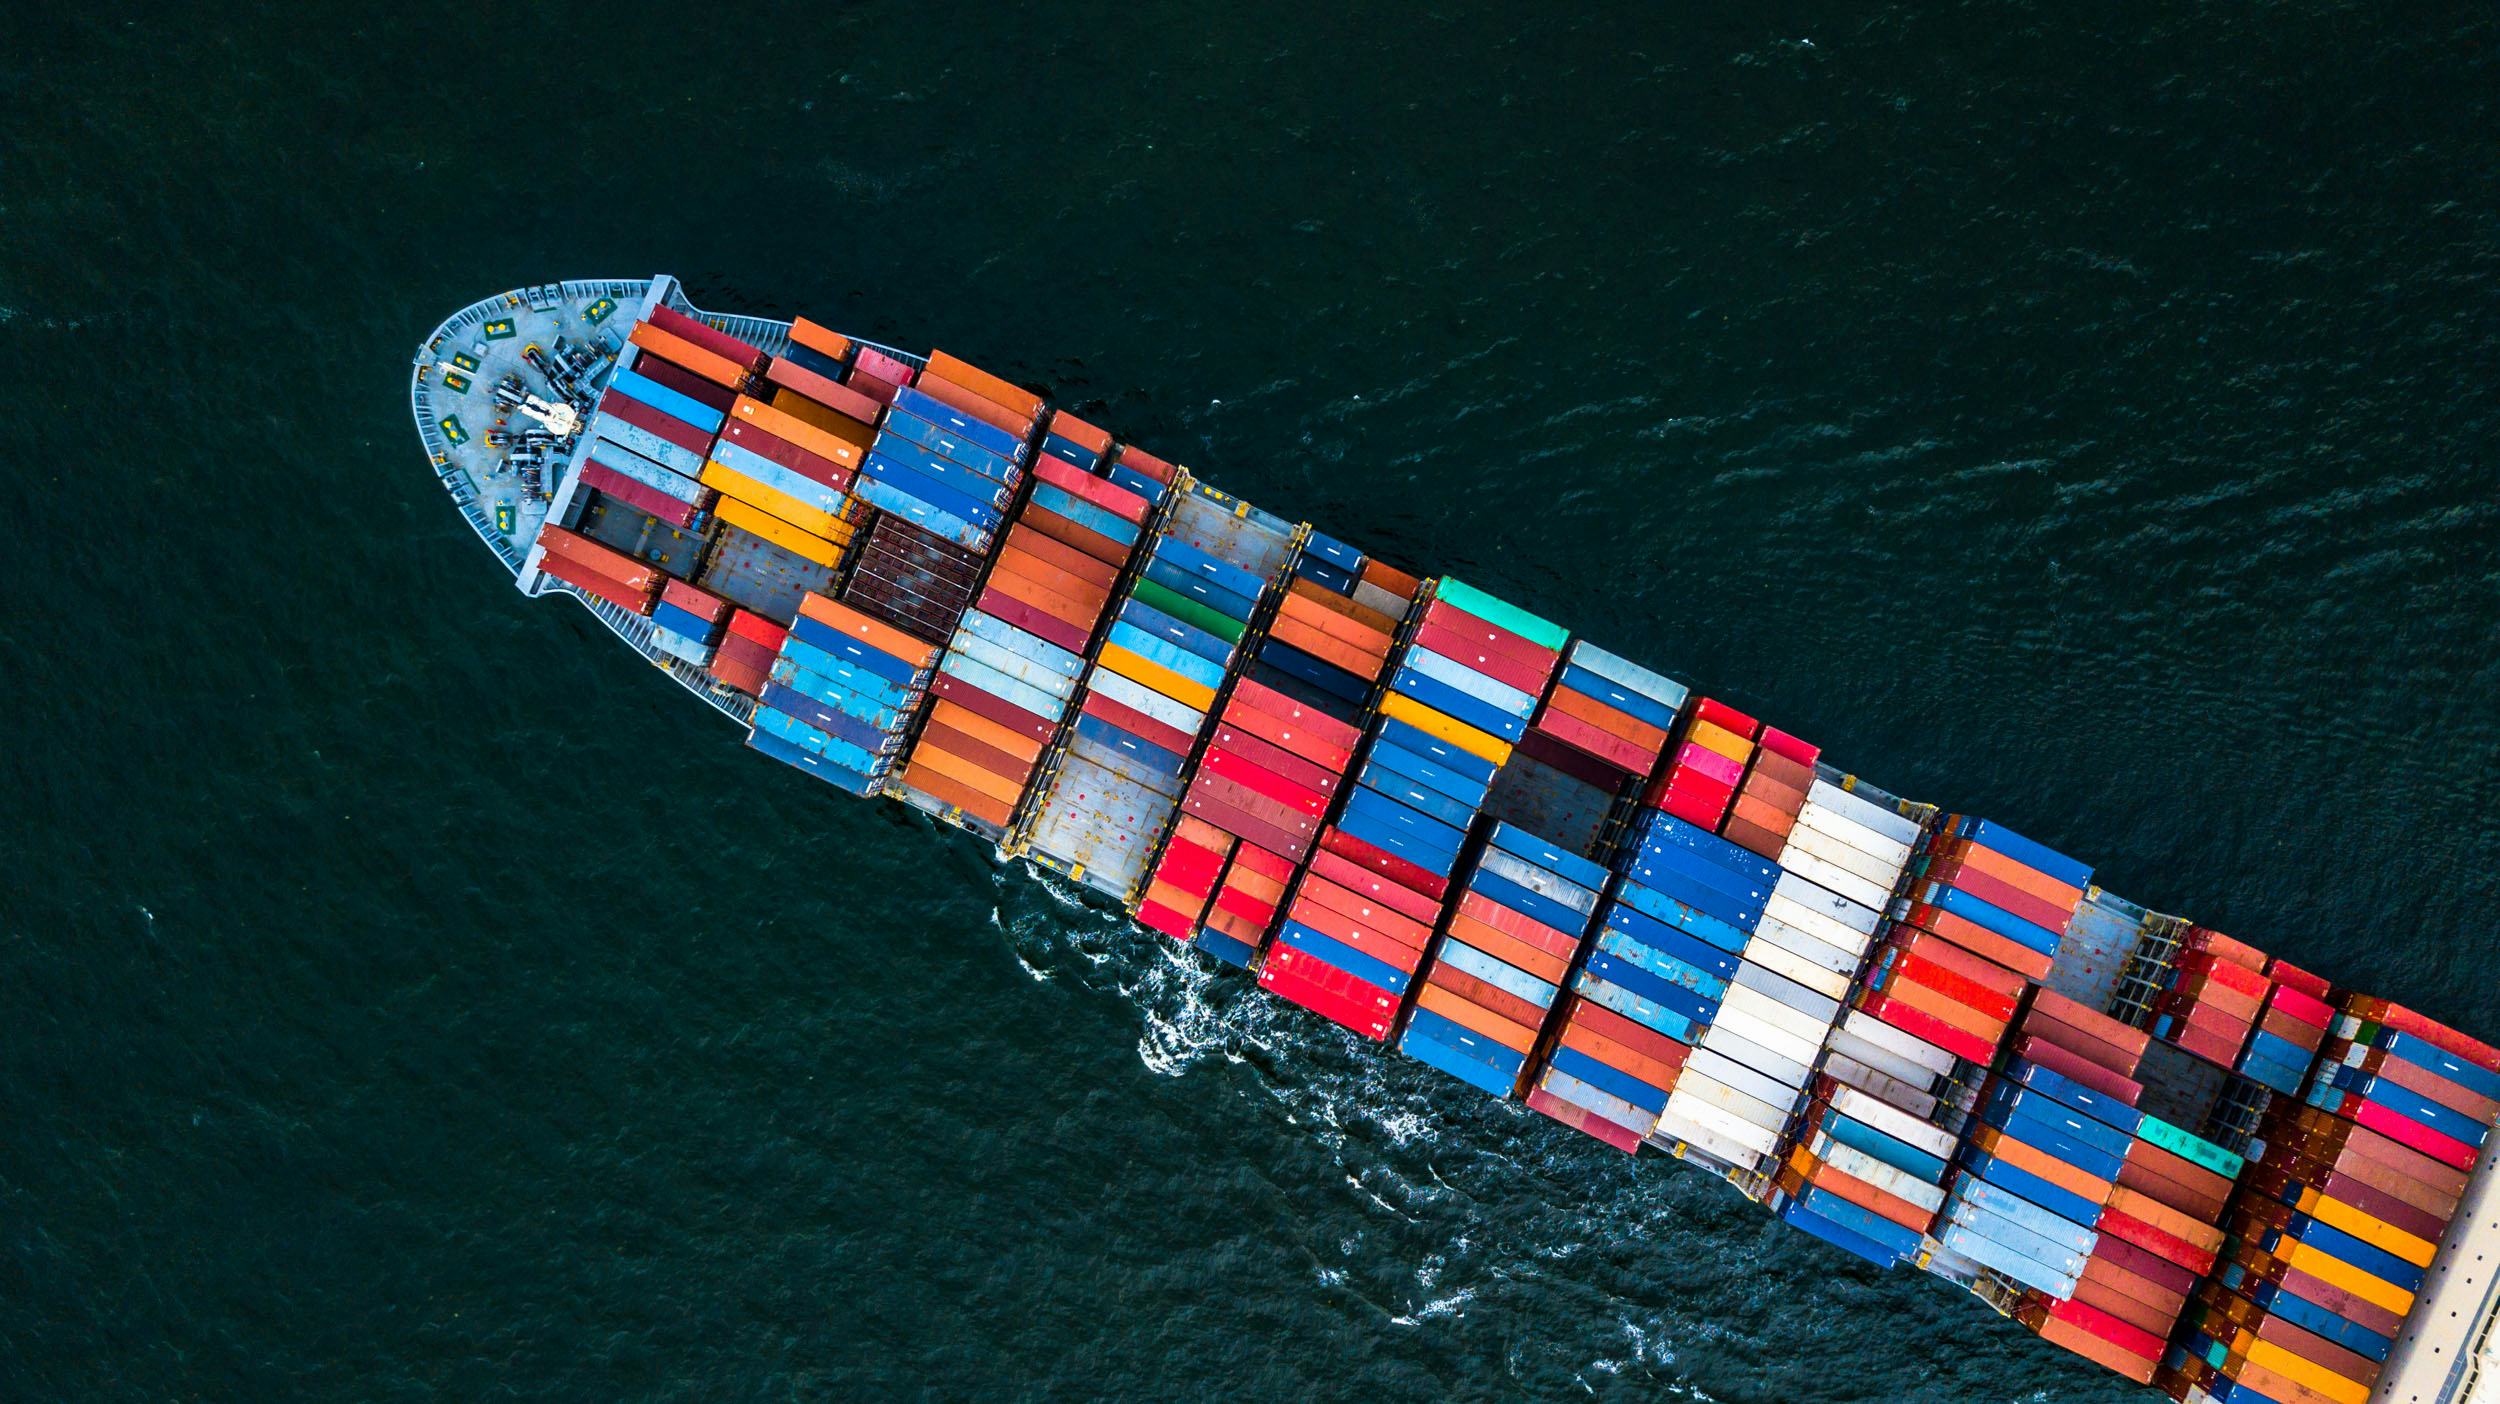 Shipping boat from above